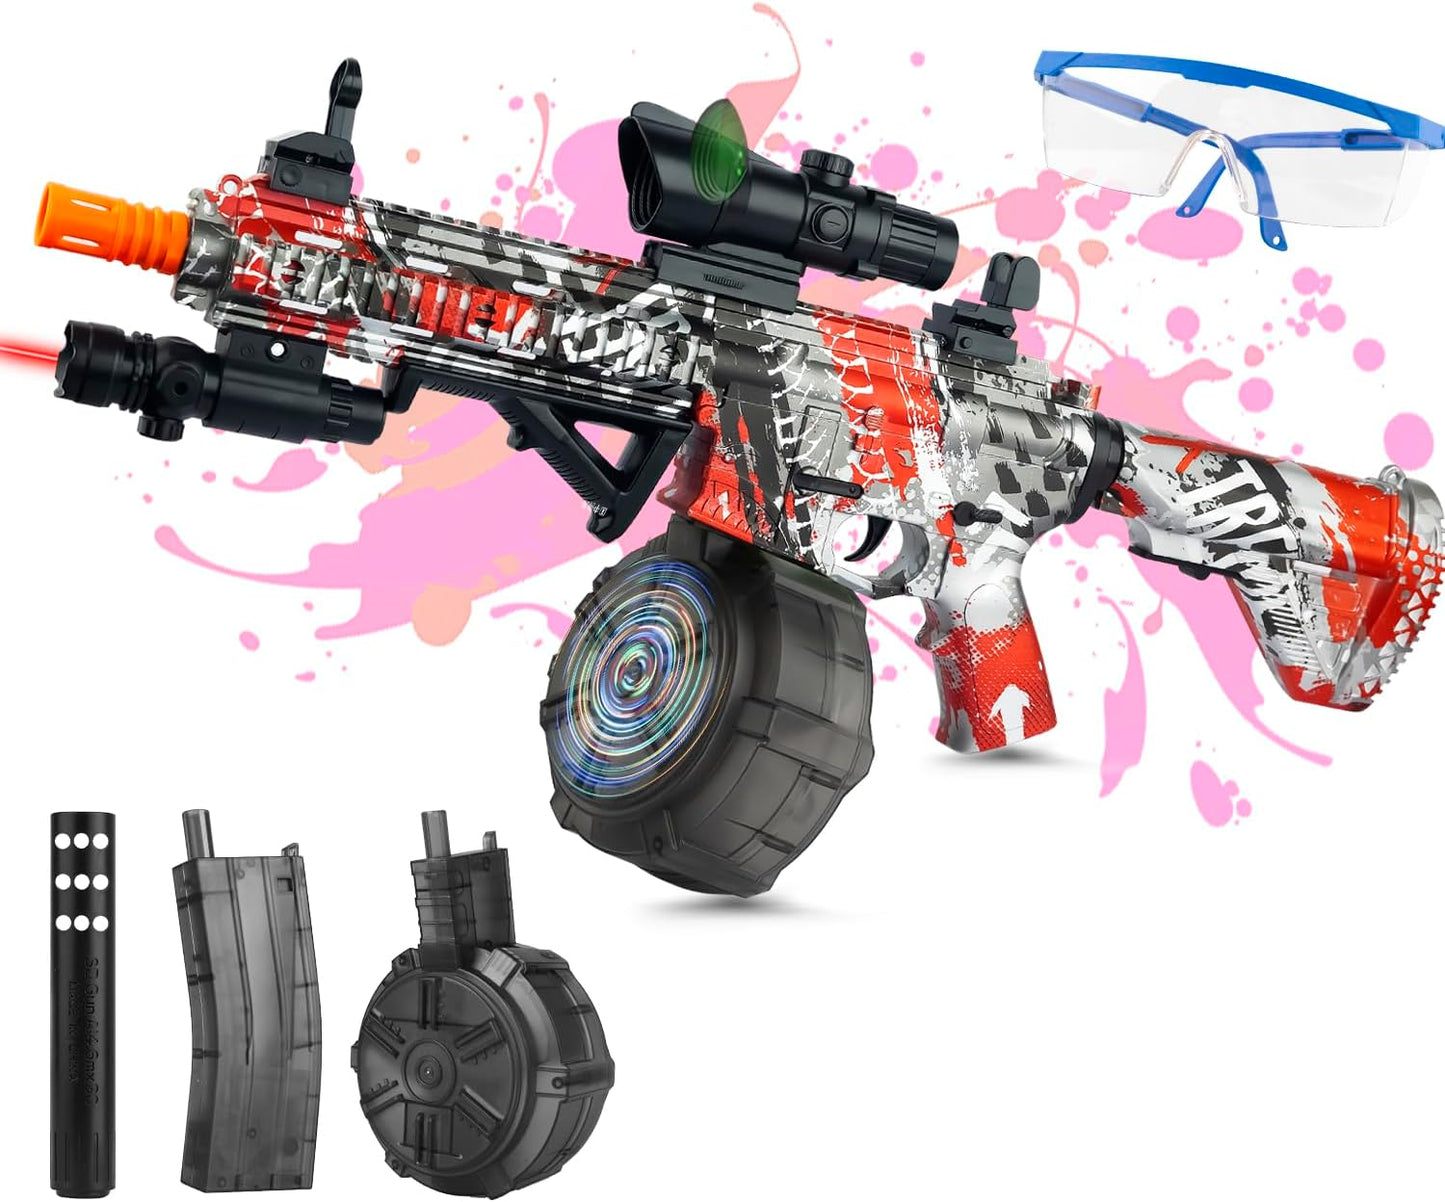 Large Gel Ball Blaster with Drum & Mag, Automatic and Manual Splatter Blaster, Electric Splat Blaster